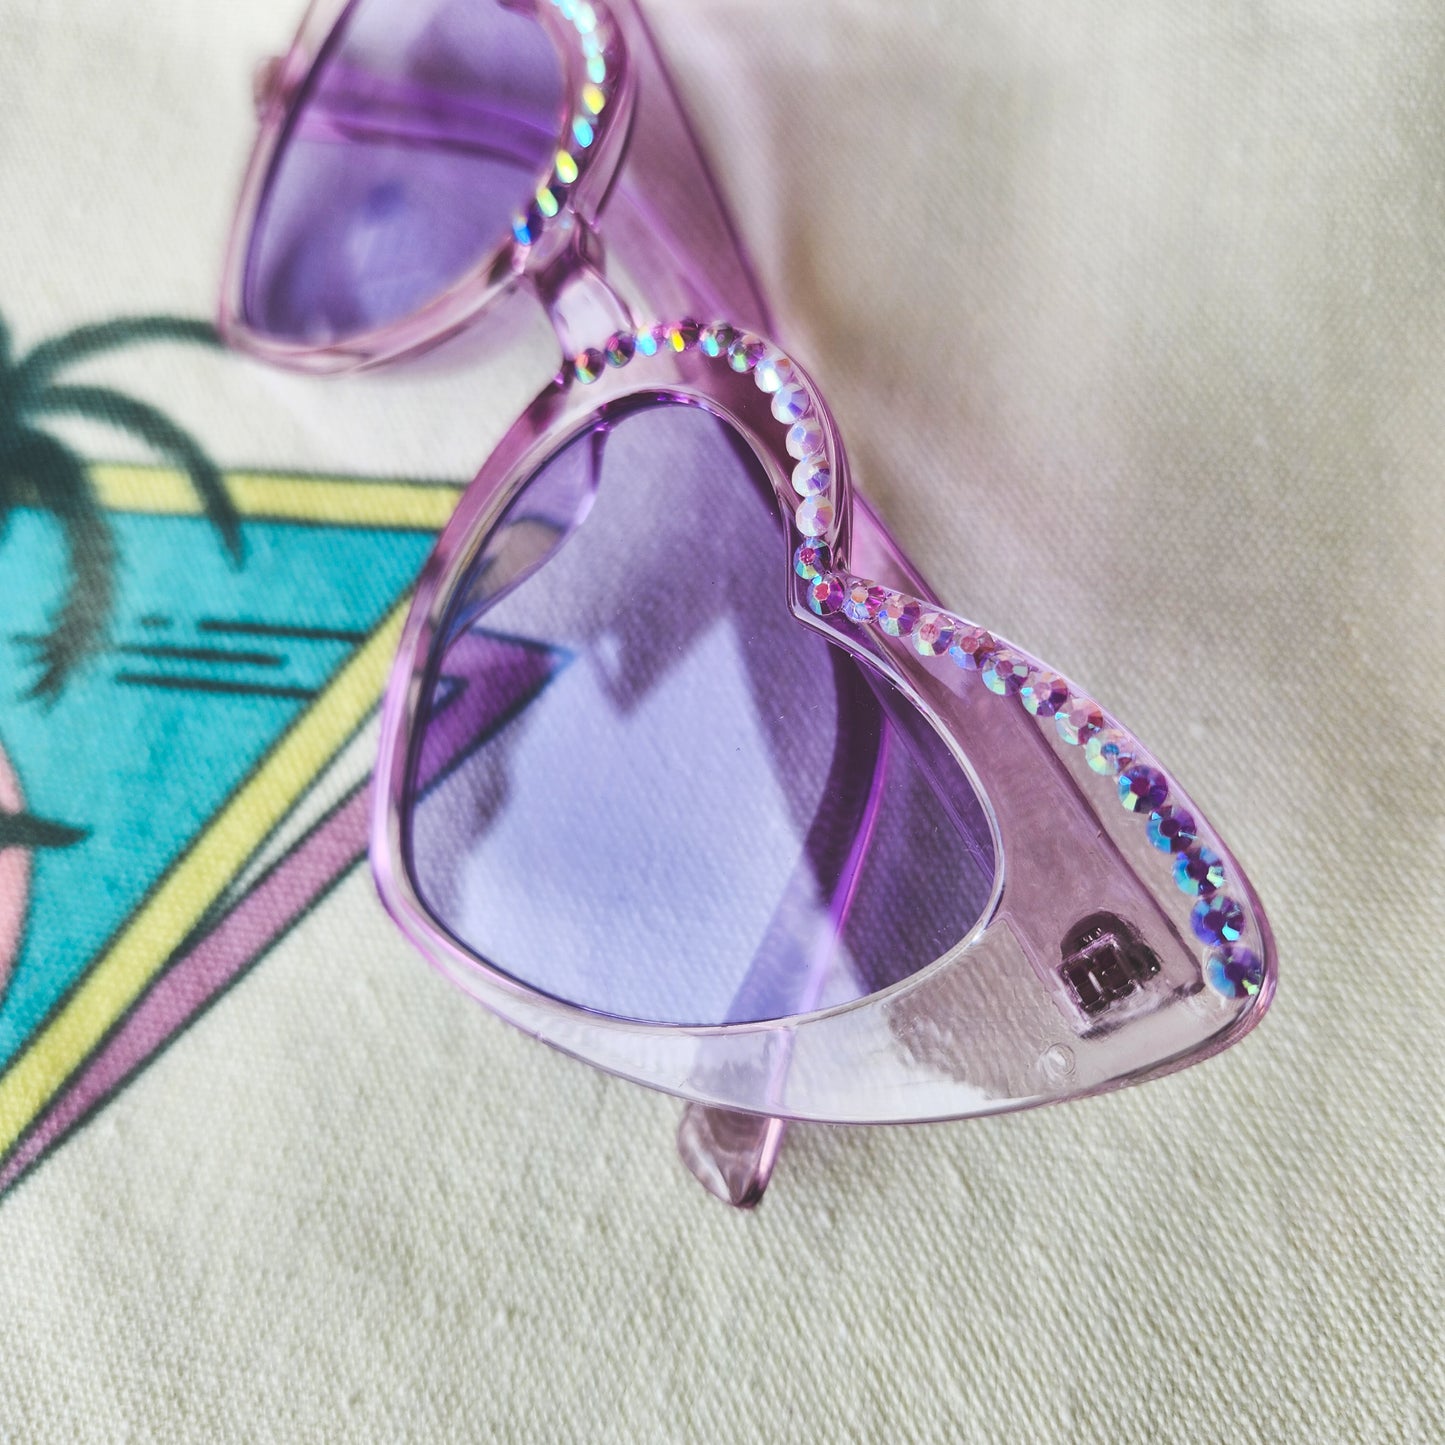 Translucent Lilac Heart Shaped Sunnies with Purple and White Rhinestone Accents